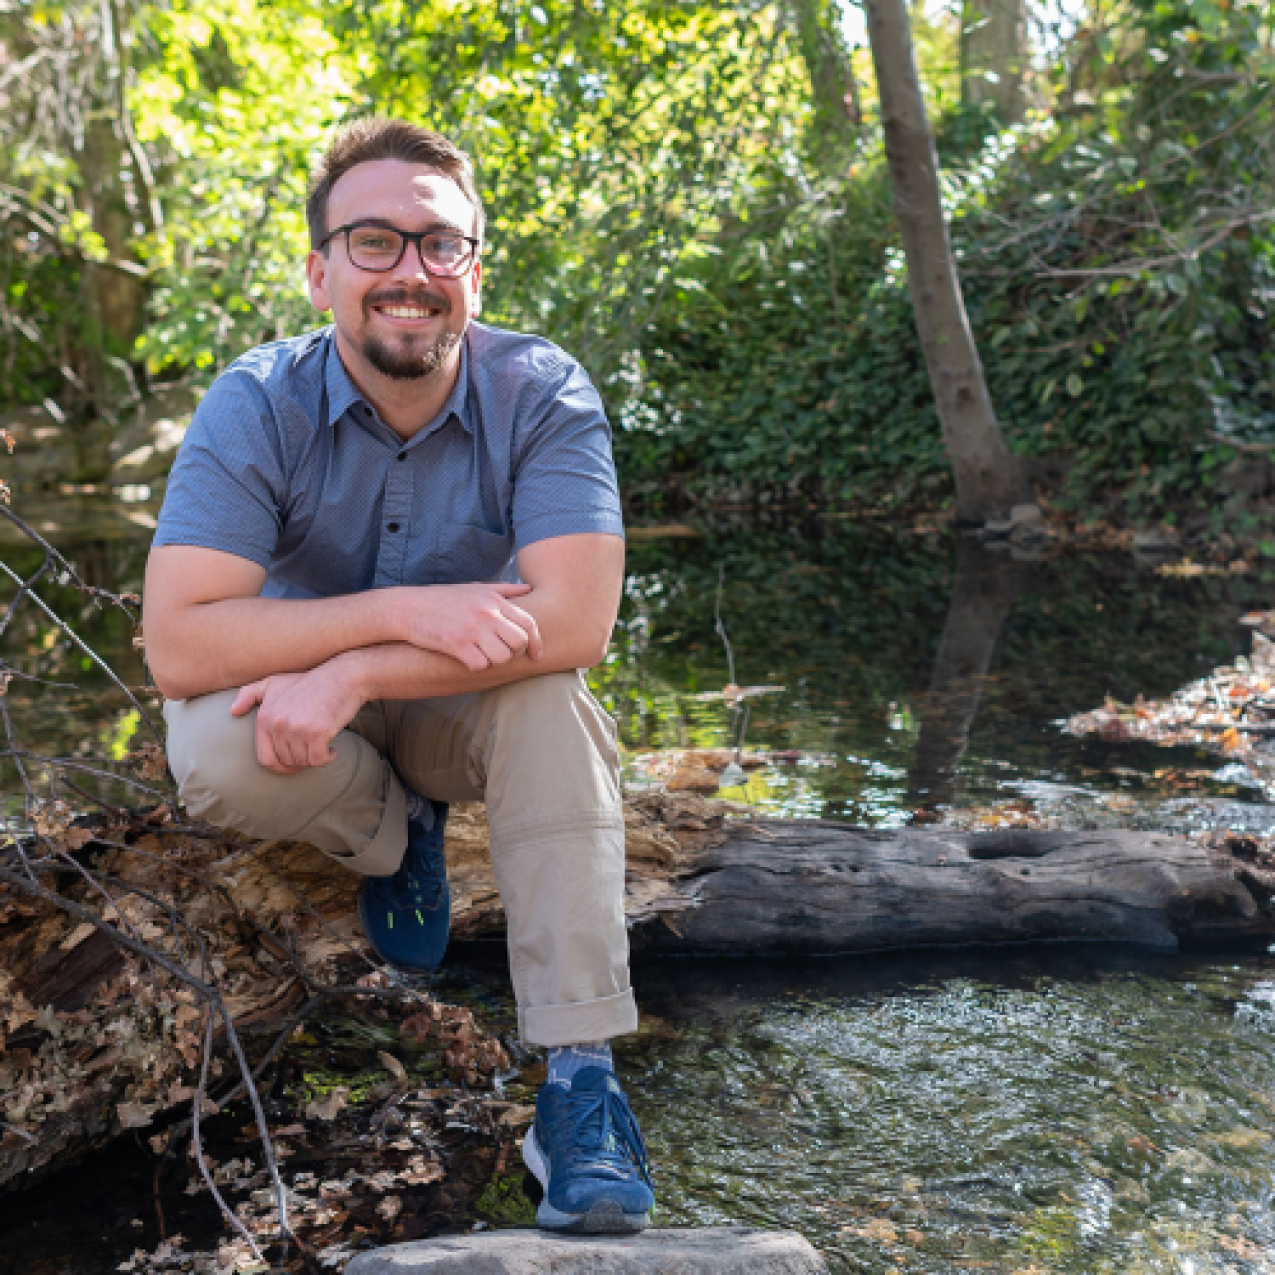 Cole wears business casual clothing and sits on a log in a wooded streamside landscape.